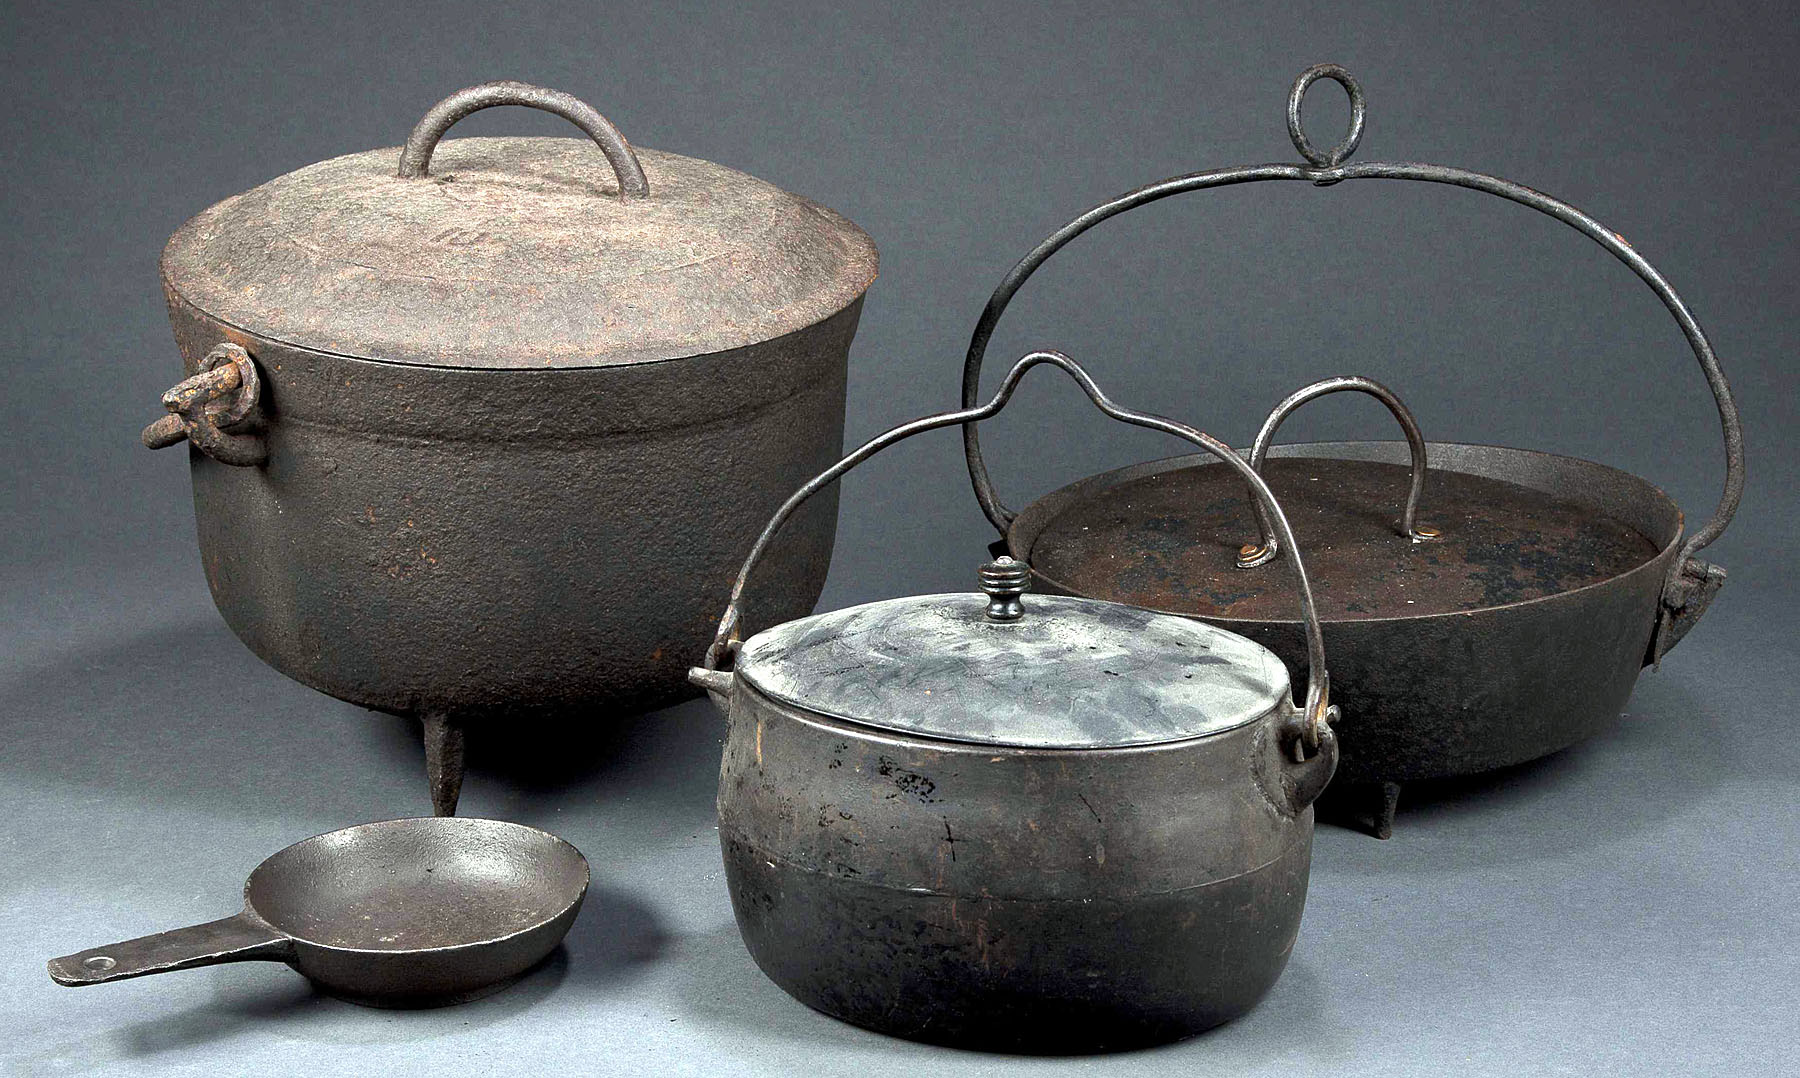 https://www.americanantiquities.com/spring%20summer%202020/Brooke/Griswold/griswold%20cookware%2018th%20century.jpg